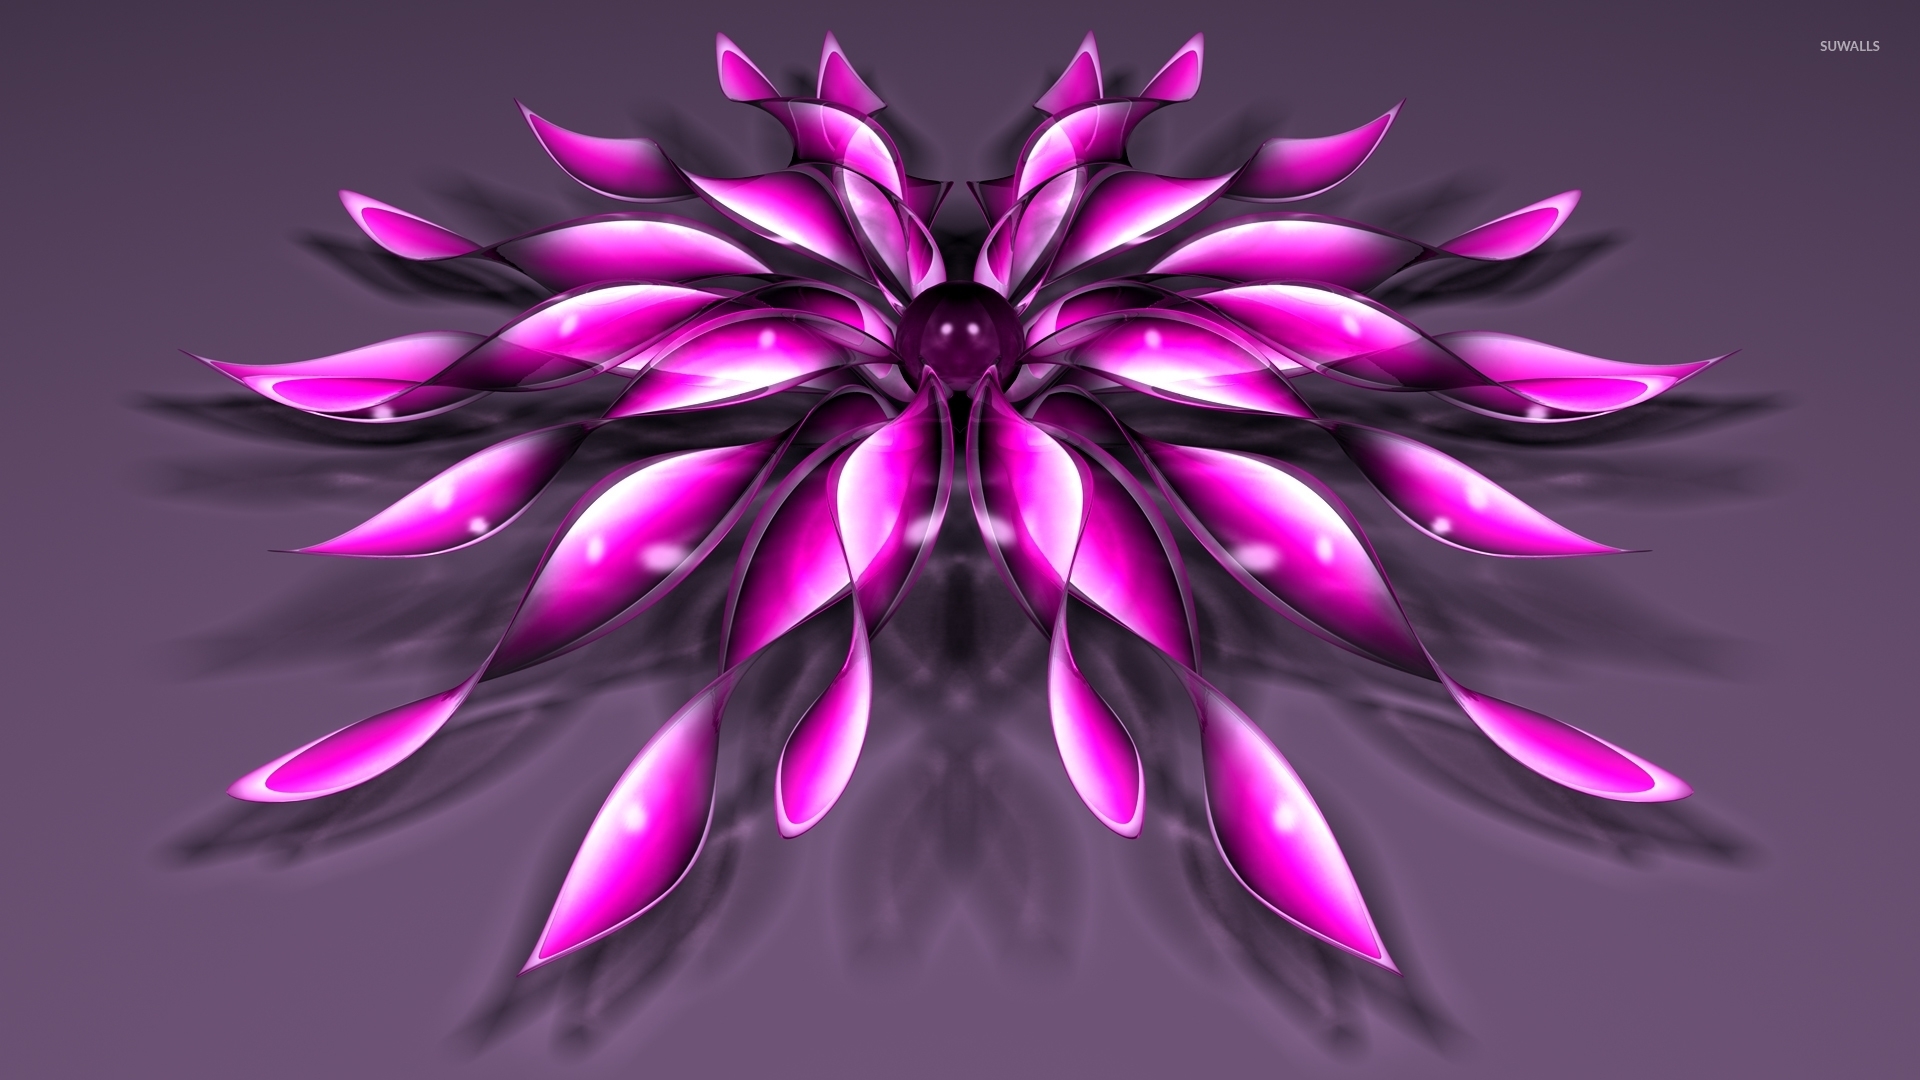 Pink flowers with a purple core wallpaper wallpaper